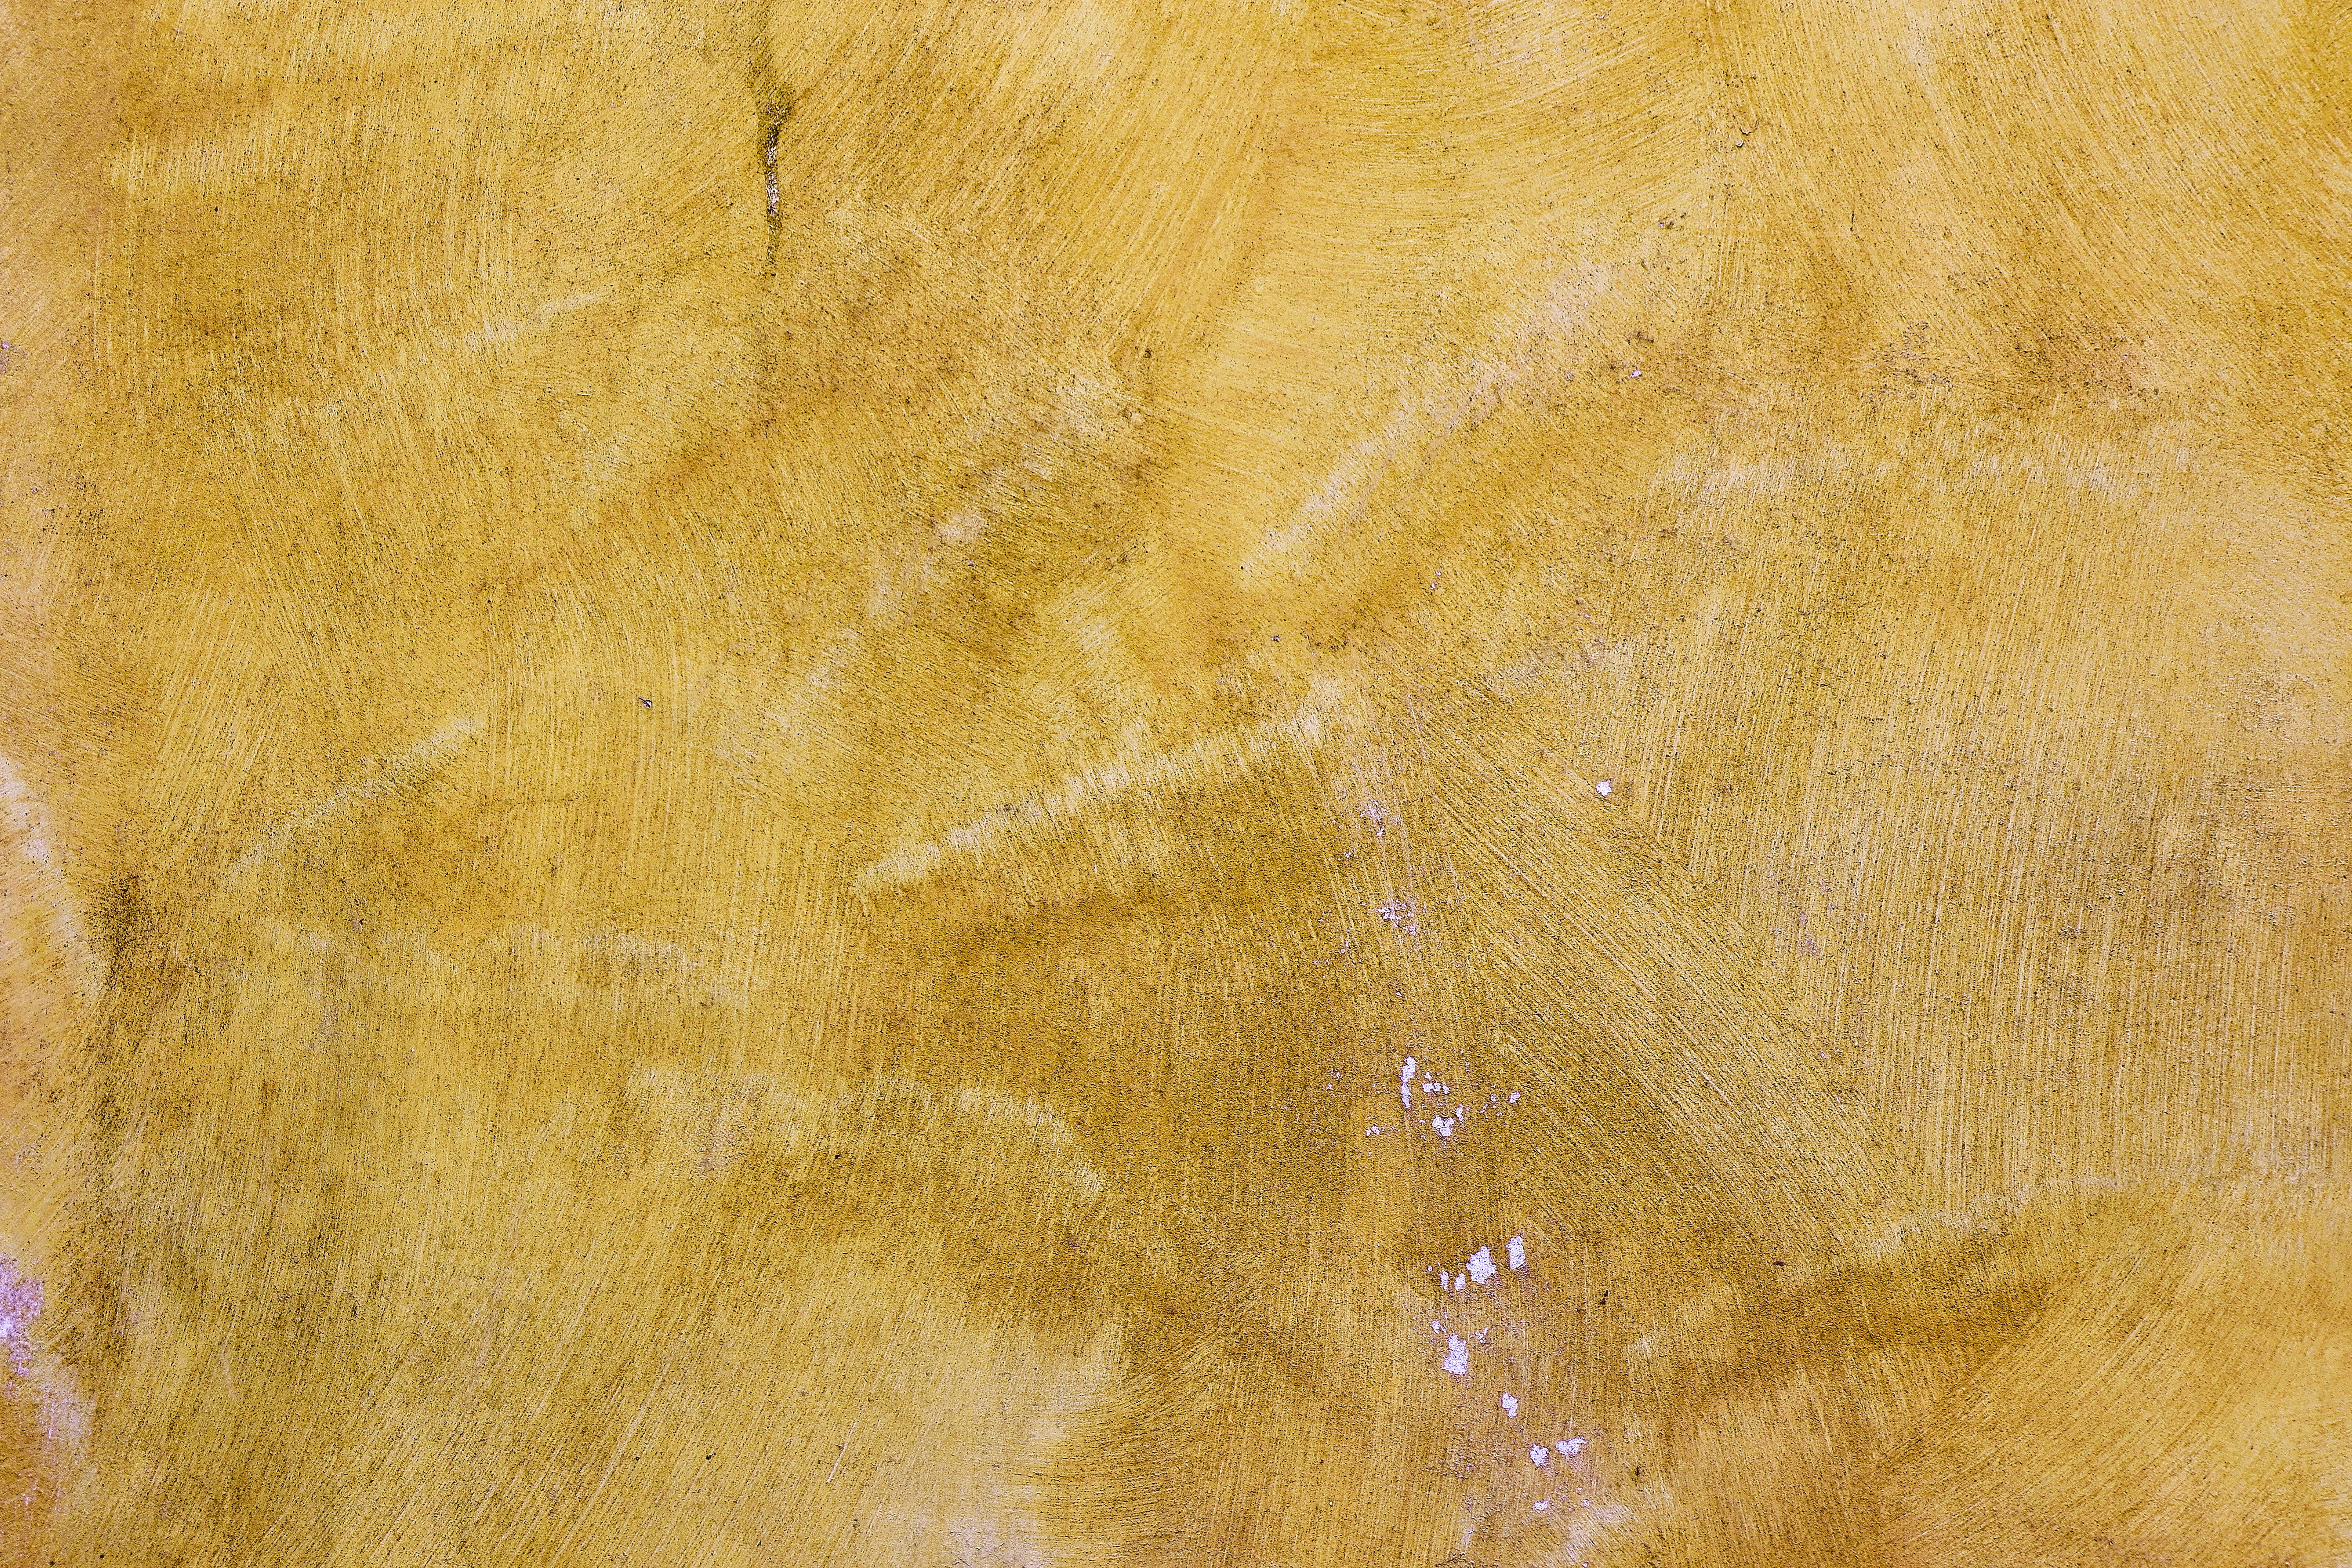 154456 free wallpaper 240x320 for phone, download images smears, textures, brown, rough 240x320 for mobile